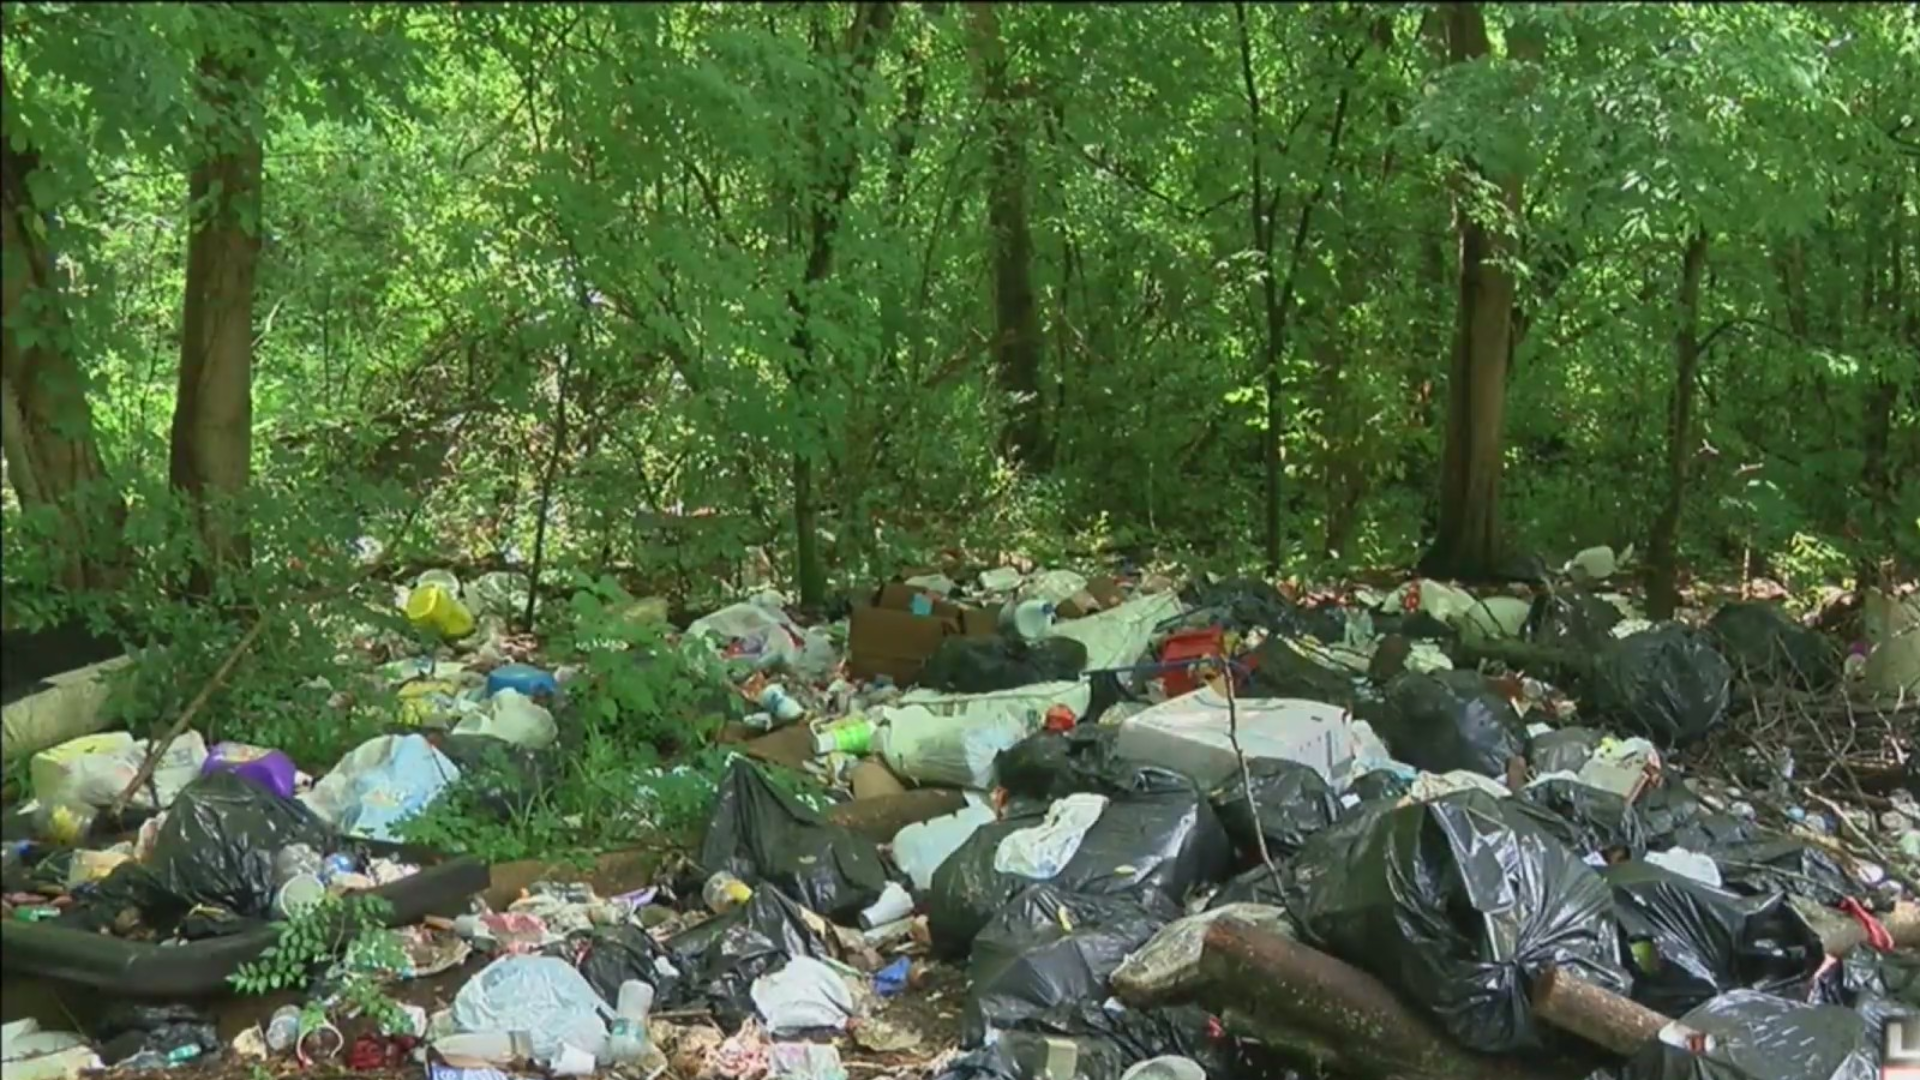 Five people charged for illegal dumping in Northaven after Local 24 News exclusive